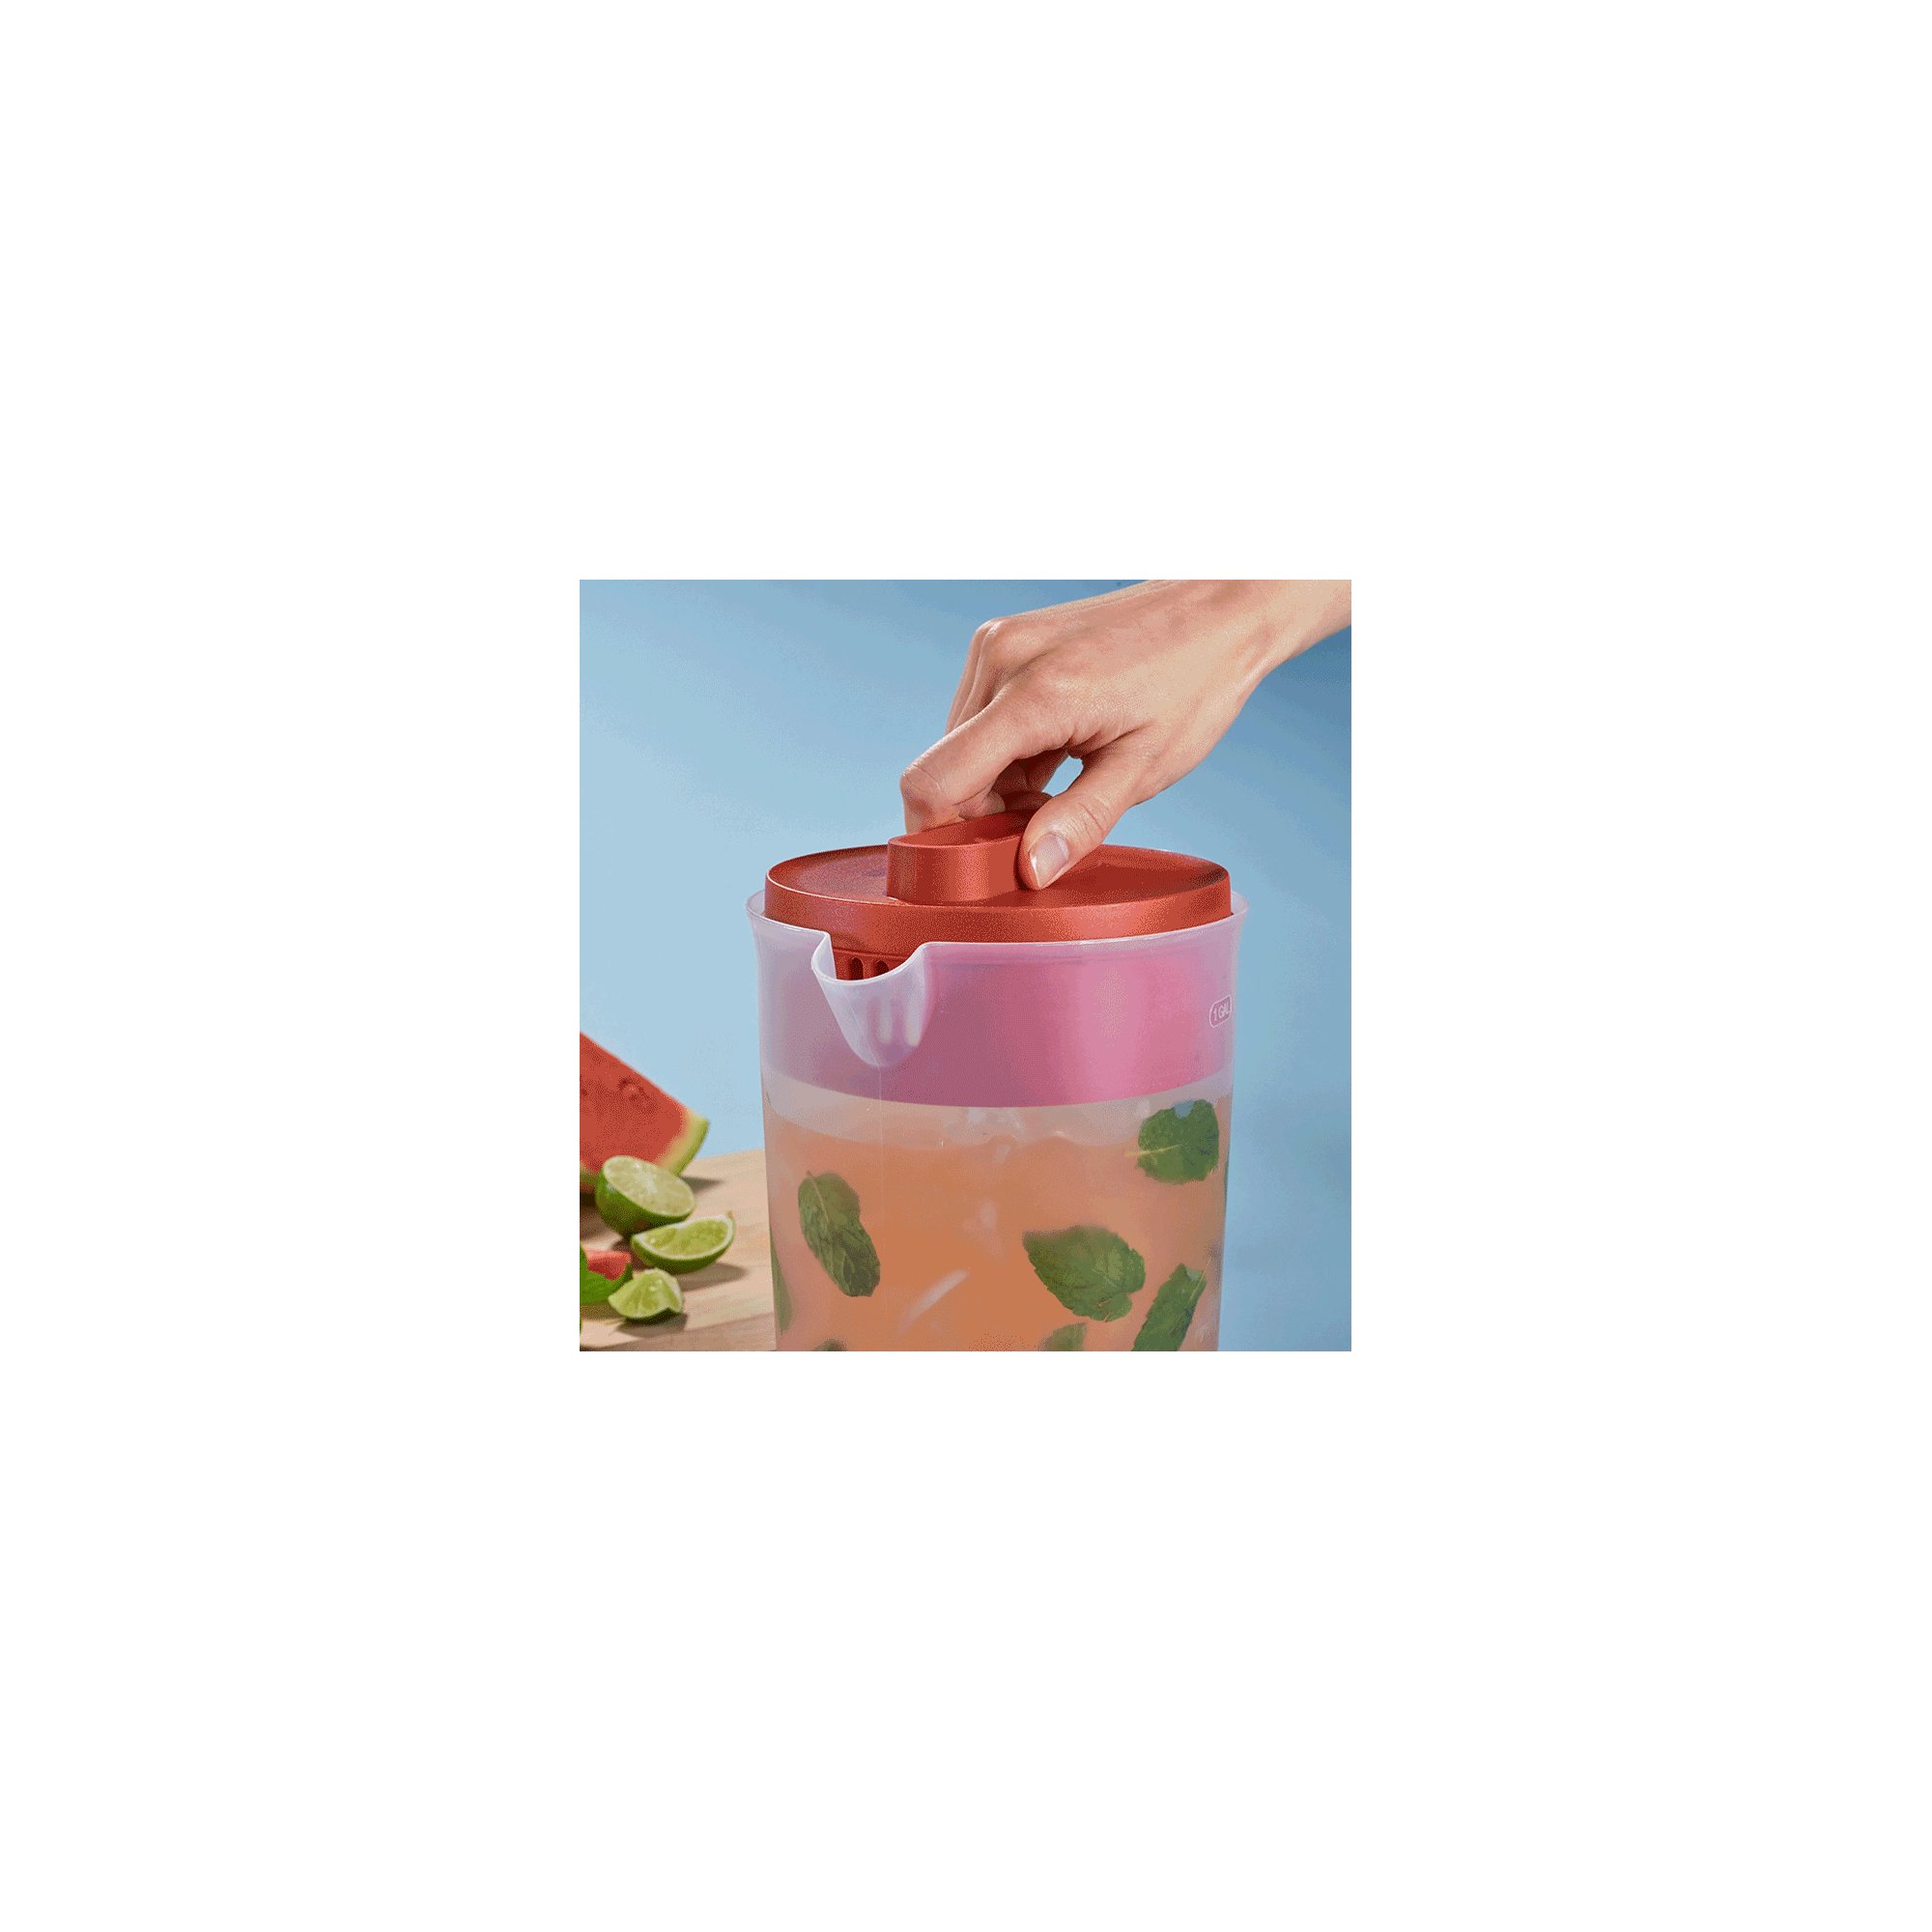 https://s7d9.scene7.com/is/image/NewellRubbermaid/2122601-rubbermaid-food-storage-simply-pour-pitcher-premium-lid-1g-red-with-food-with-talent-lifestyle-2_SQUARE?wid=2000&hei=2000